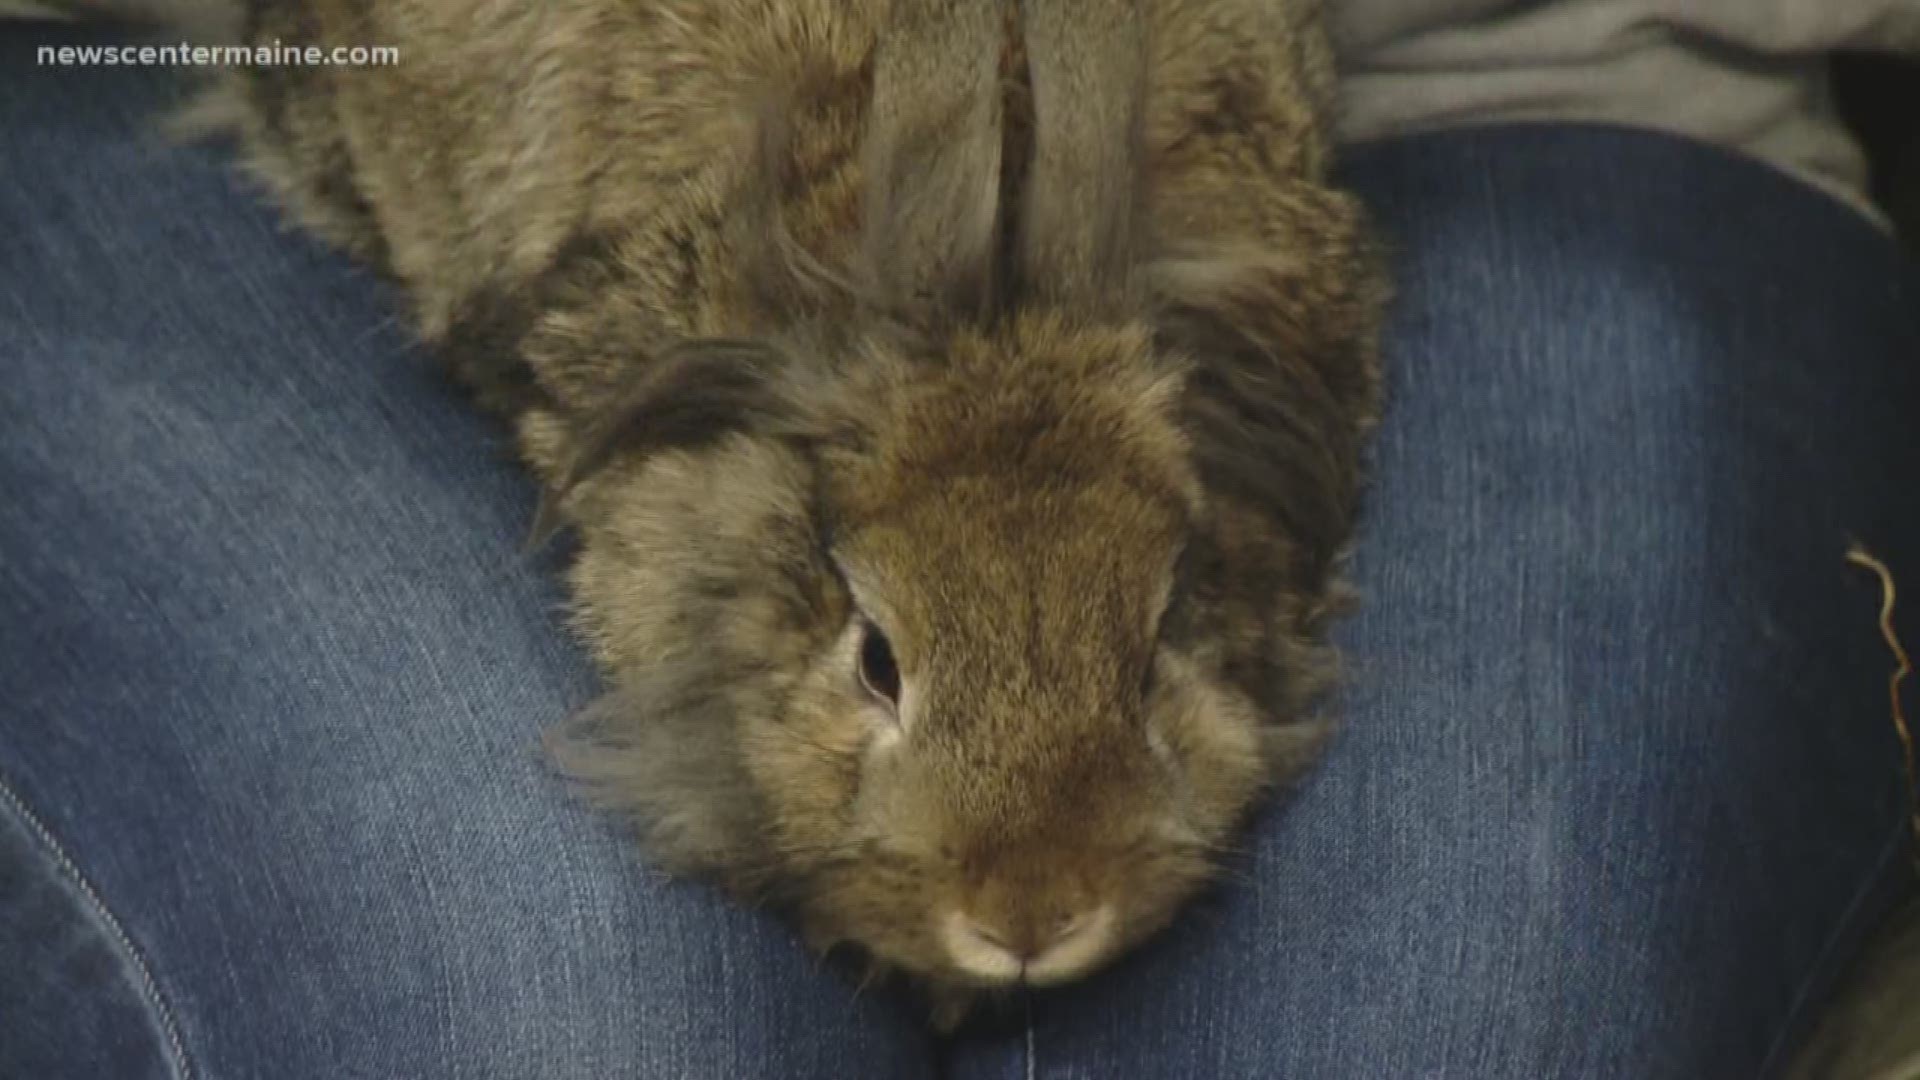 Sherlock the bunny is available for adoption at the Animal Refuge League of Greater Portland